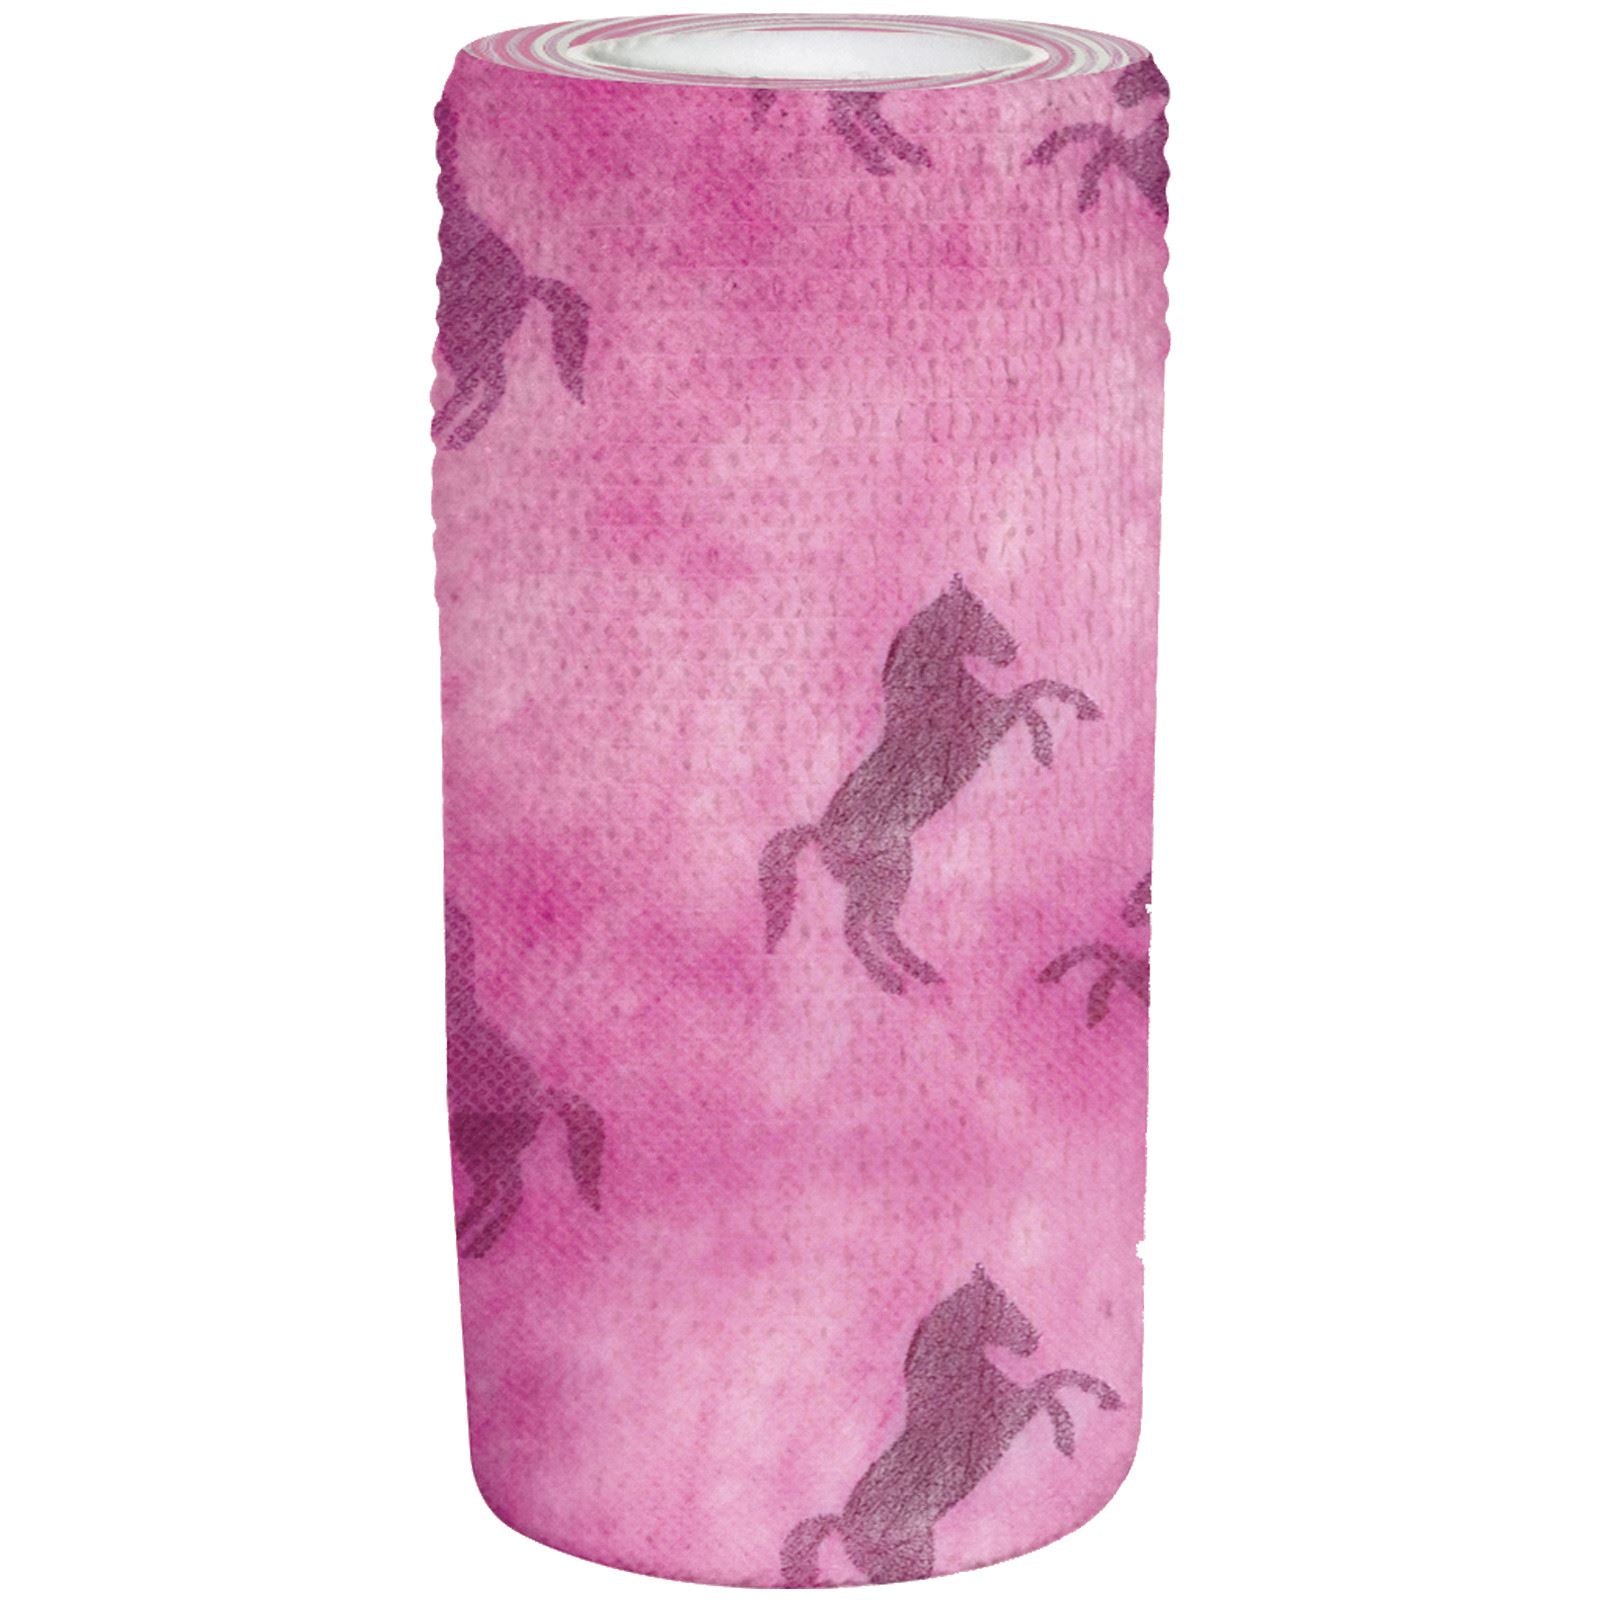 Perry Equestrian 100mm x 4.5m Cohesive Bandage (Pink Pony) - Just Horse Riders